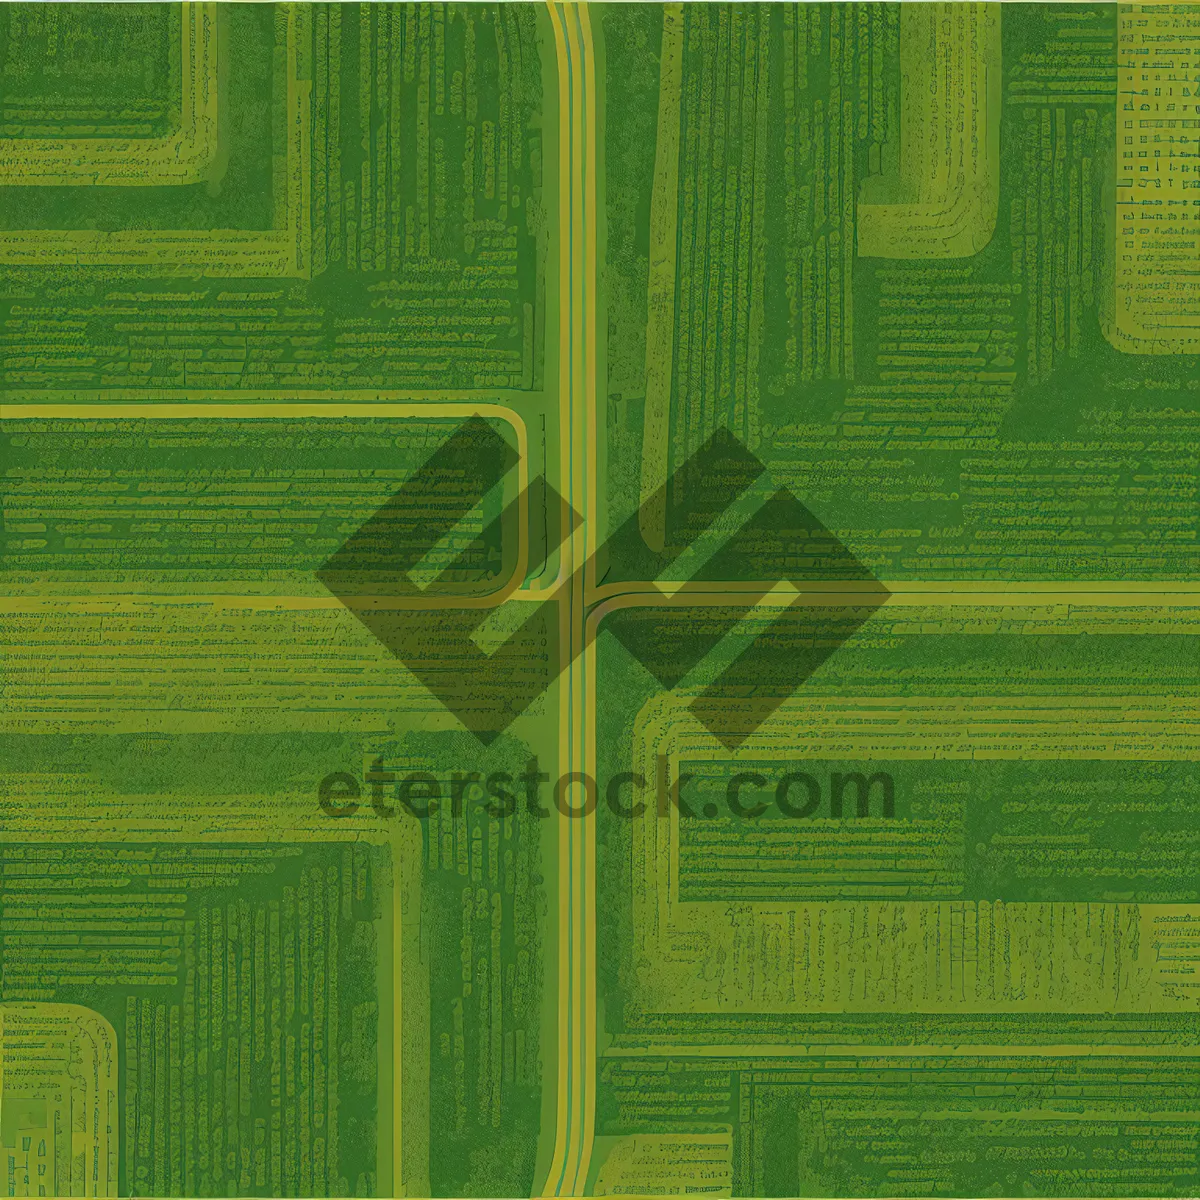 Picture of Vintage Grunge Circuit Board Texture Wallpaper Design